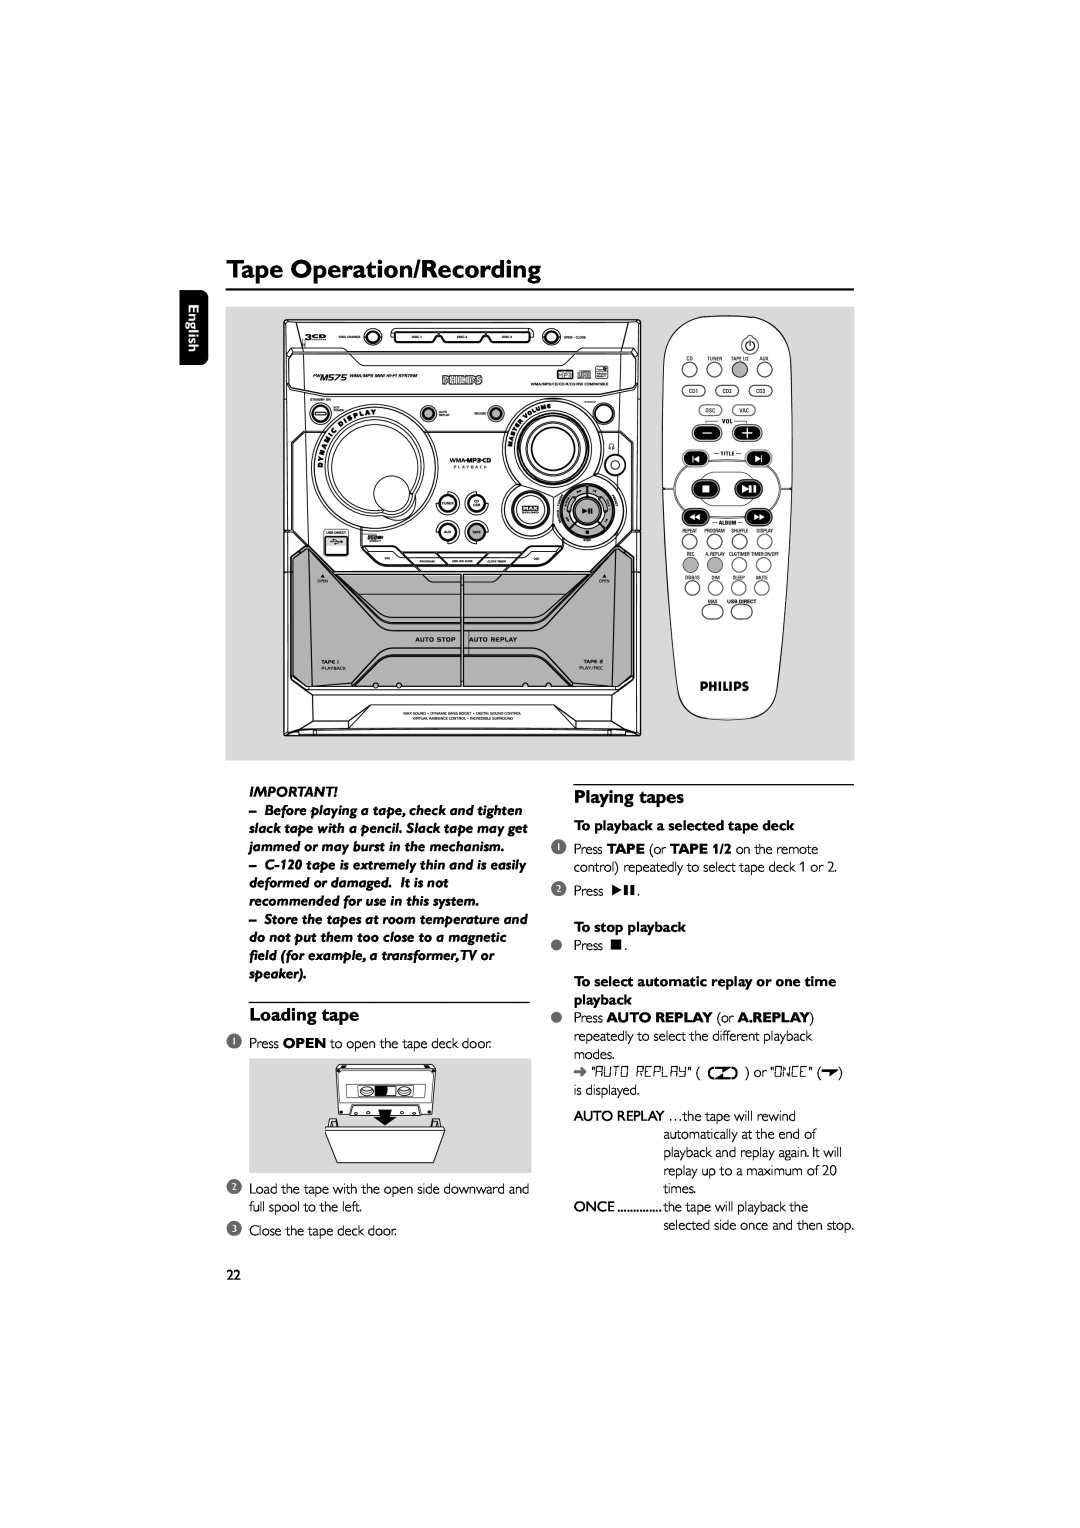 Philips FWM575/37B owner manual Tape Operation/Recording, Loading tape, Playing tapes, To playback a selected tape deck 